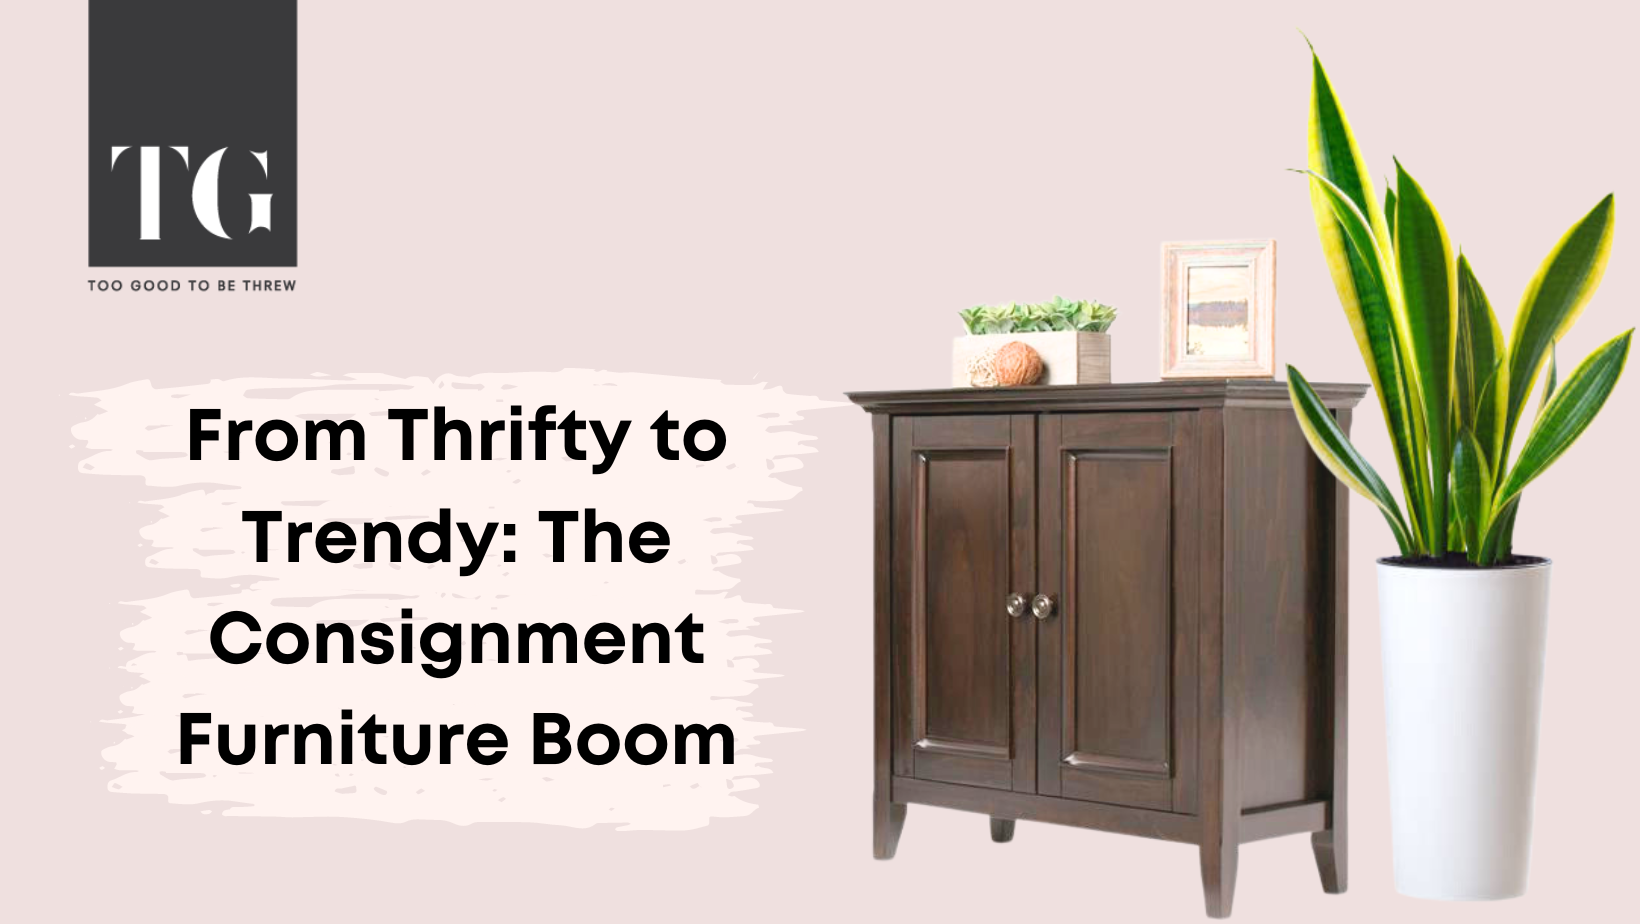 From Thrifty to Trendy: The Consignment Furniture Boom